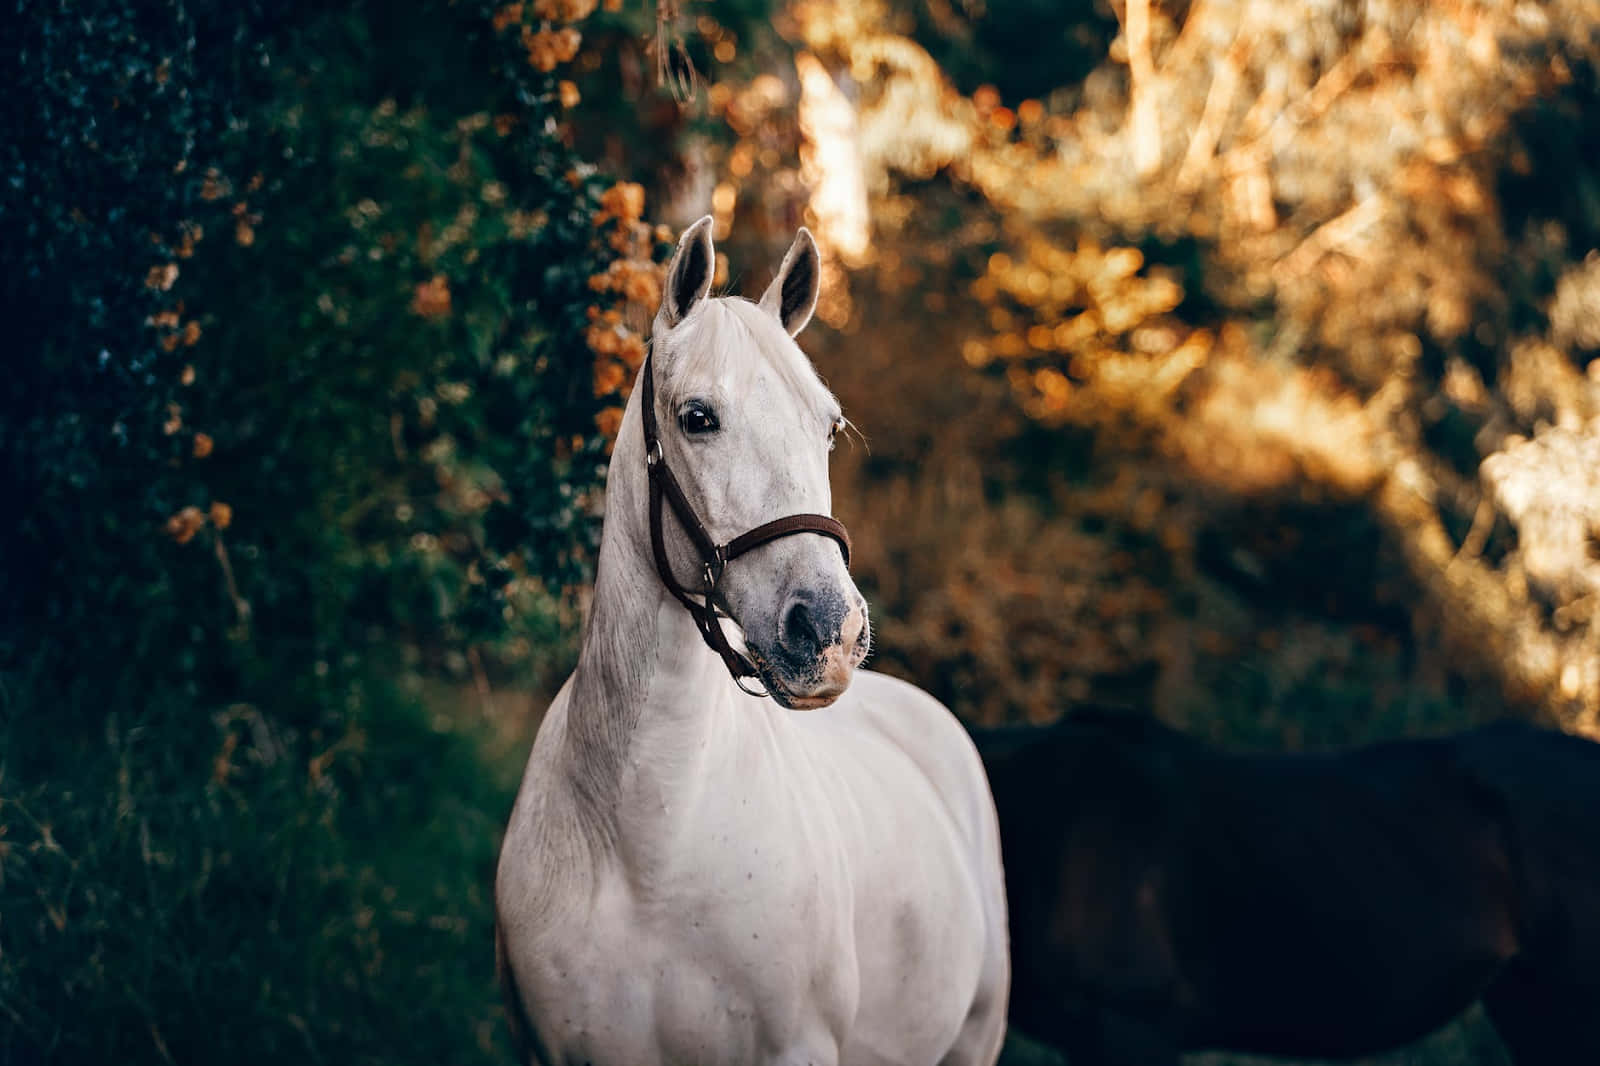 A Mysterious White Horse